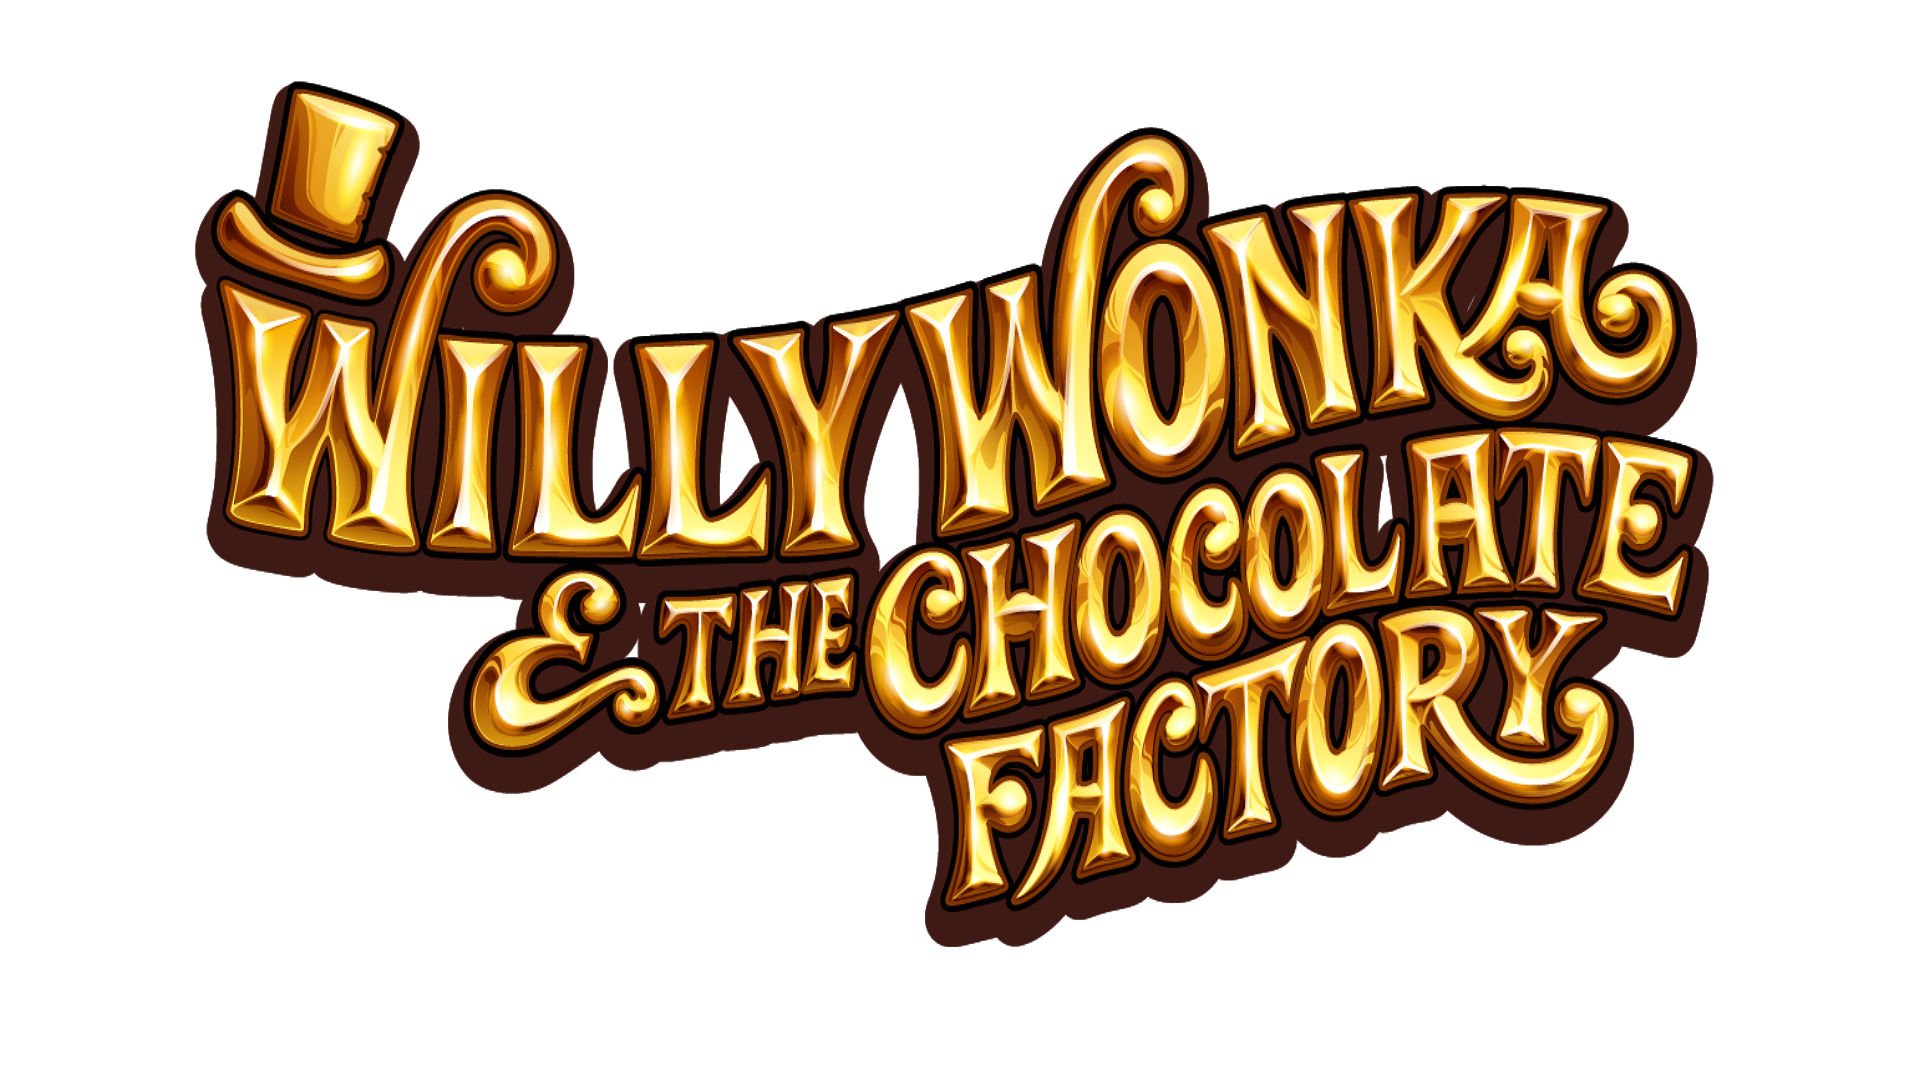 willy, Wonka, Chocolate, Factory, Charlie, Adventure, Family, Comedy Wallpaper